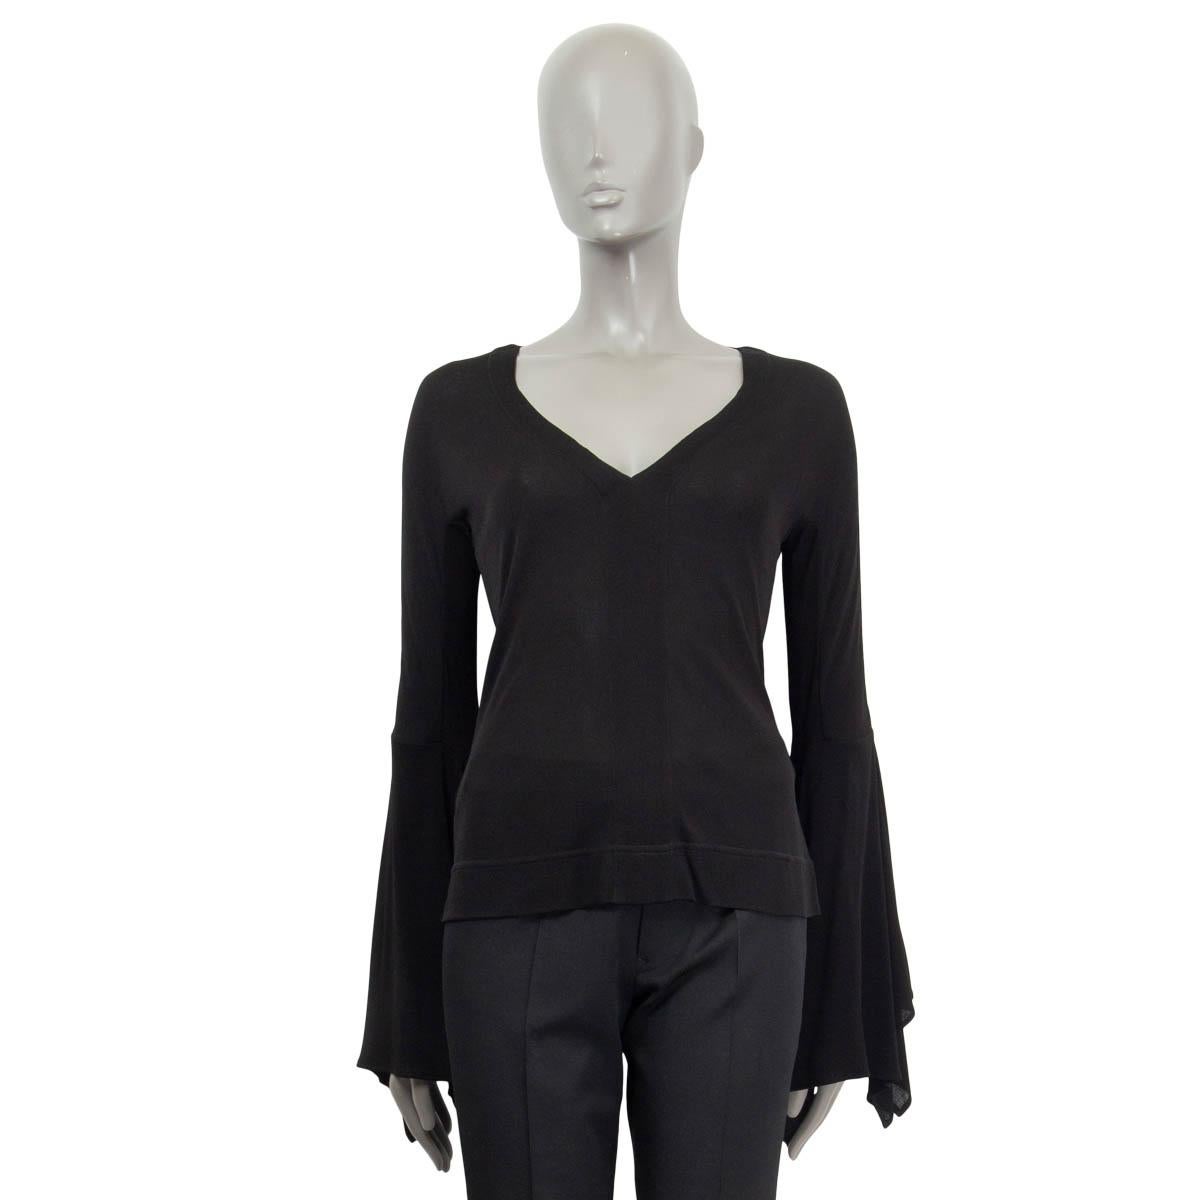 100% authentic Tom Ford v-neck blouse in black viscose (100%) with extra long bell-sleeves. Has been worn and is in excellent condition. 

Measurements
Tag Size	44
Size	L
Shoulder Width	42cm (16.4in)
Bust From	98cm (38.2in)
Waist From	84cm